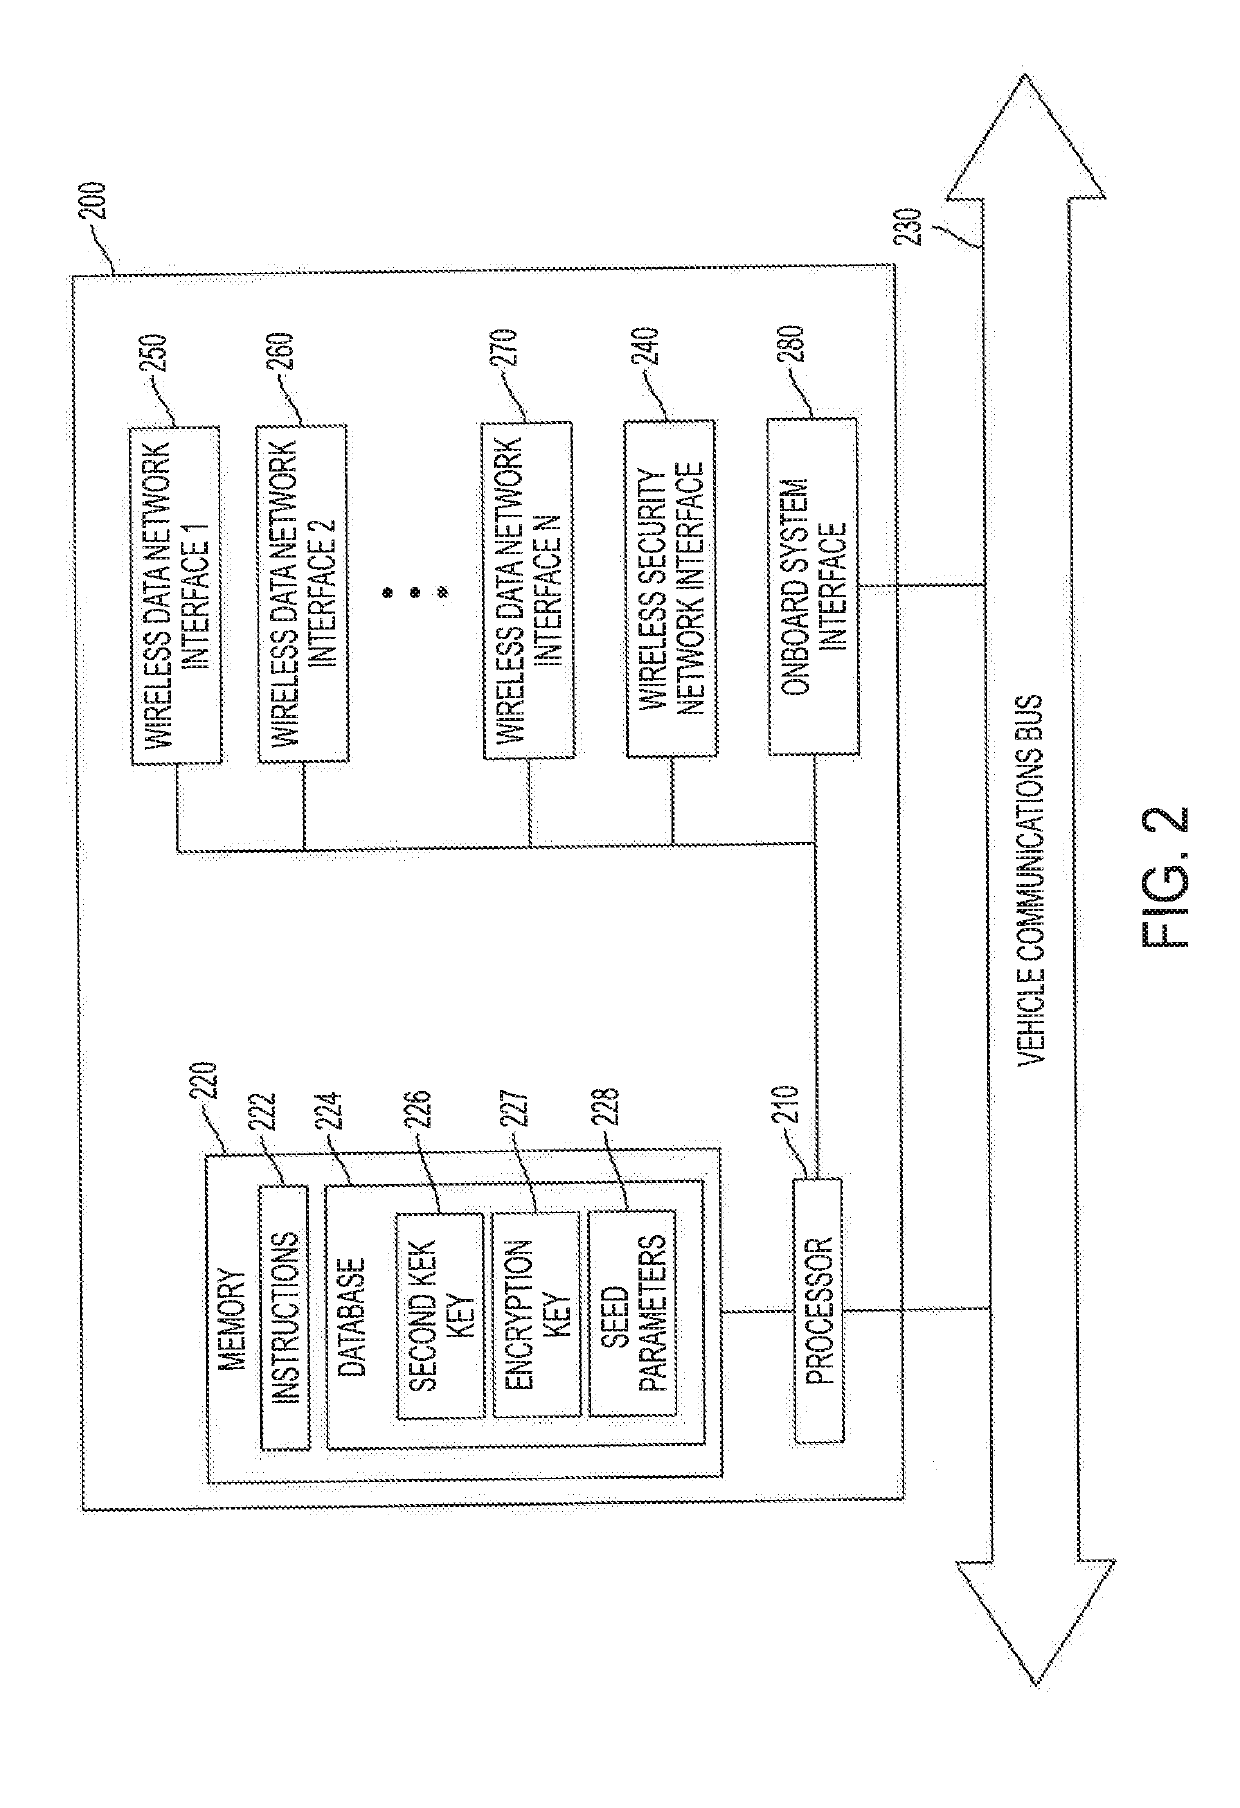 Systems and methods for using an out-of-band security channel for enhancing secure interactions with automotive electronic control units